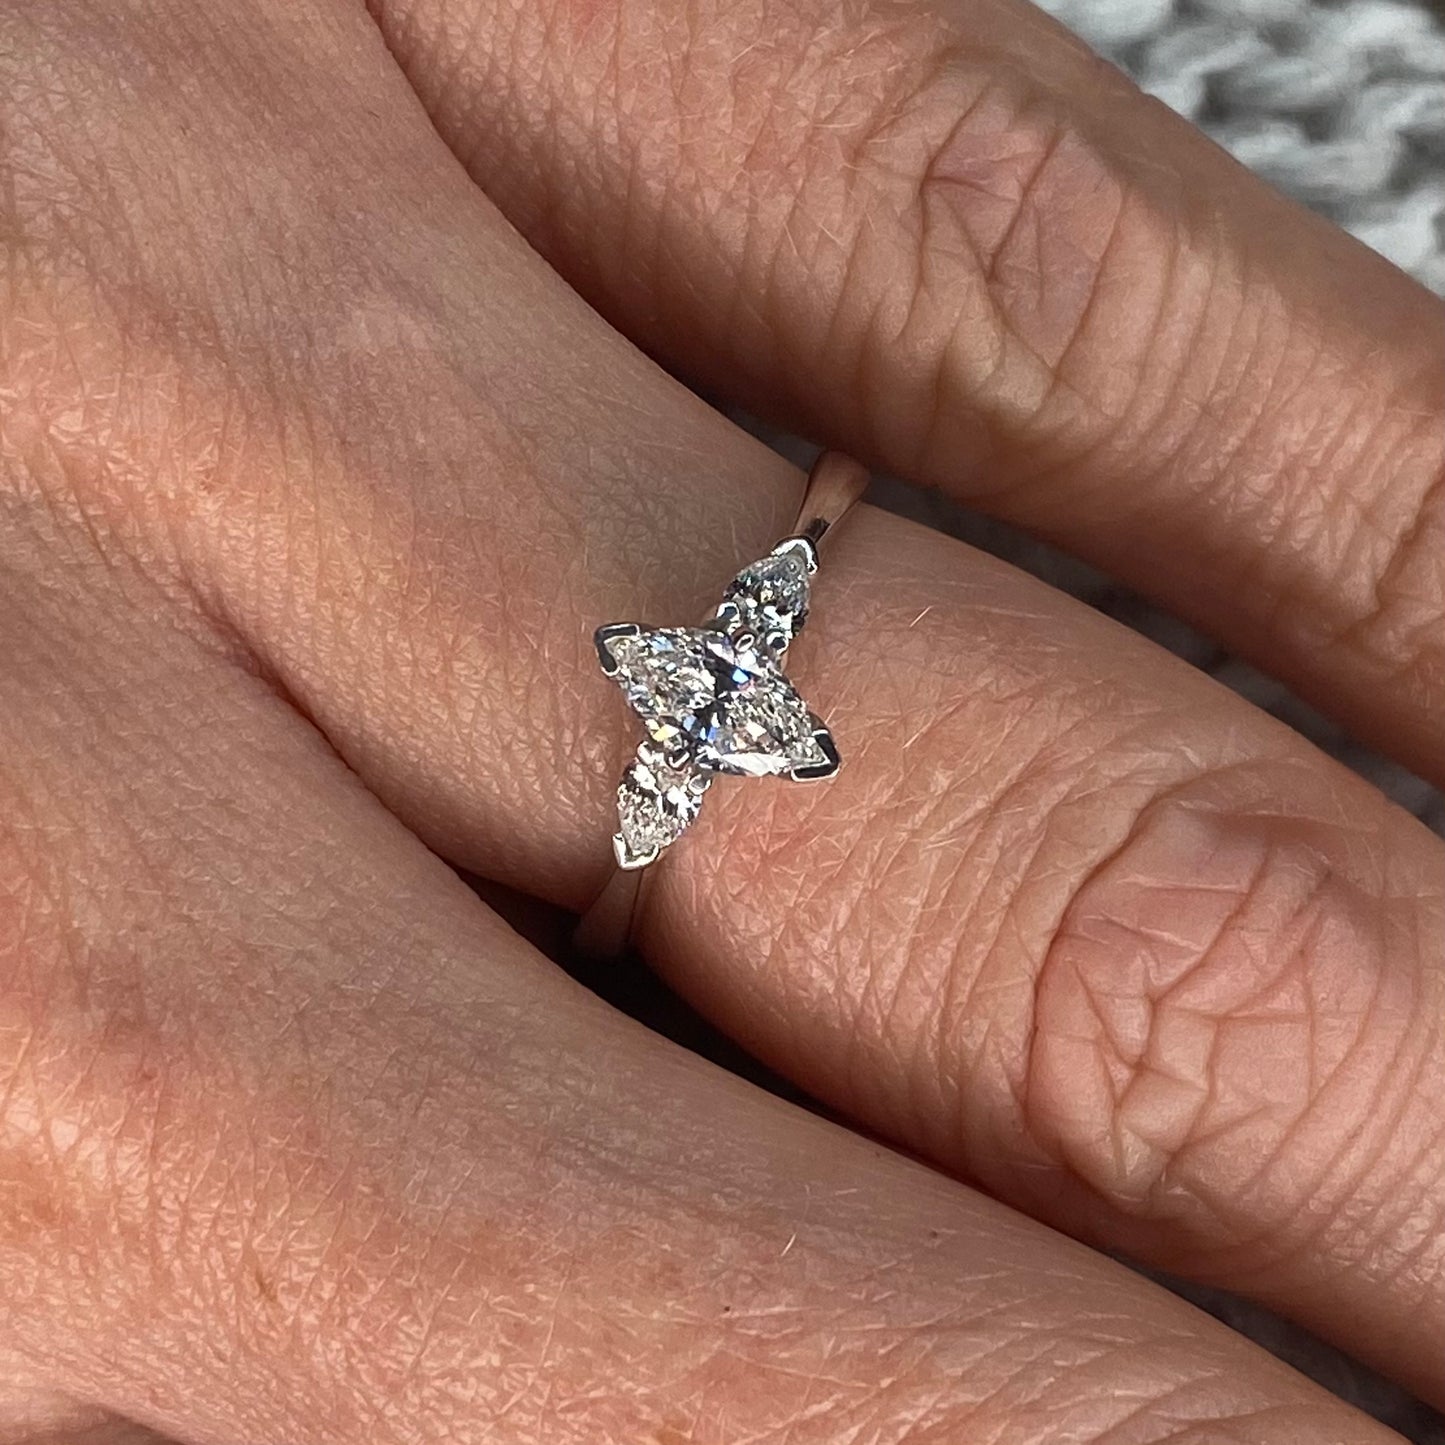 This diamond engagement ring  is a complete classic.  Its simplicity is so romantic.  The Details...  One 18ct white gold diamond engagement ring.  A Marquis cut diamond with a pear cut diamond at each side. Claw set. 0.71ct in total of diamonds.  Colour G.  Clarity SI  18ct white gold.  Size N  Made in Ireland